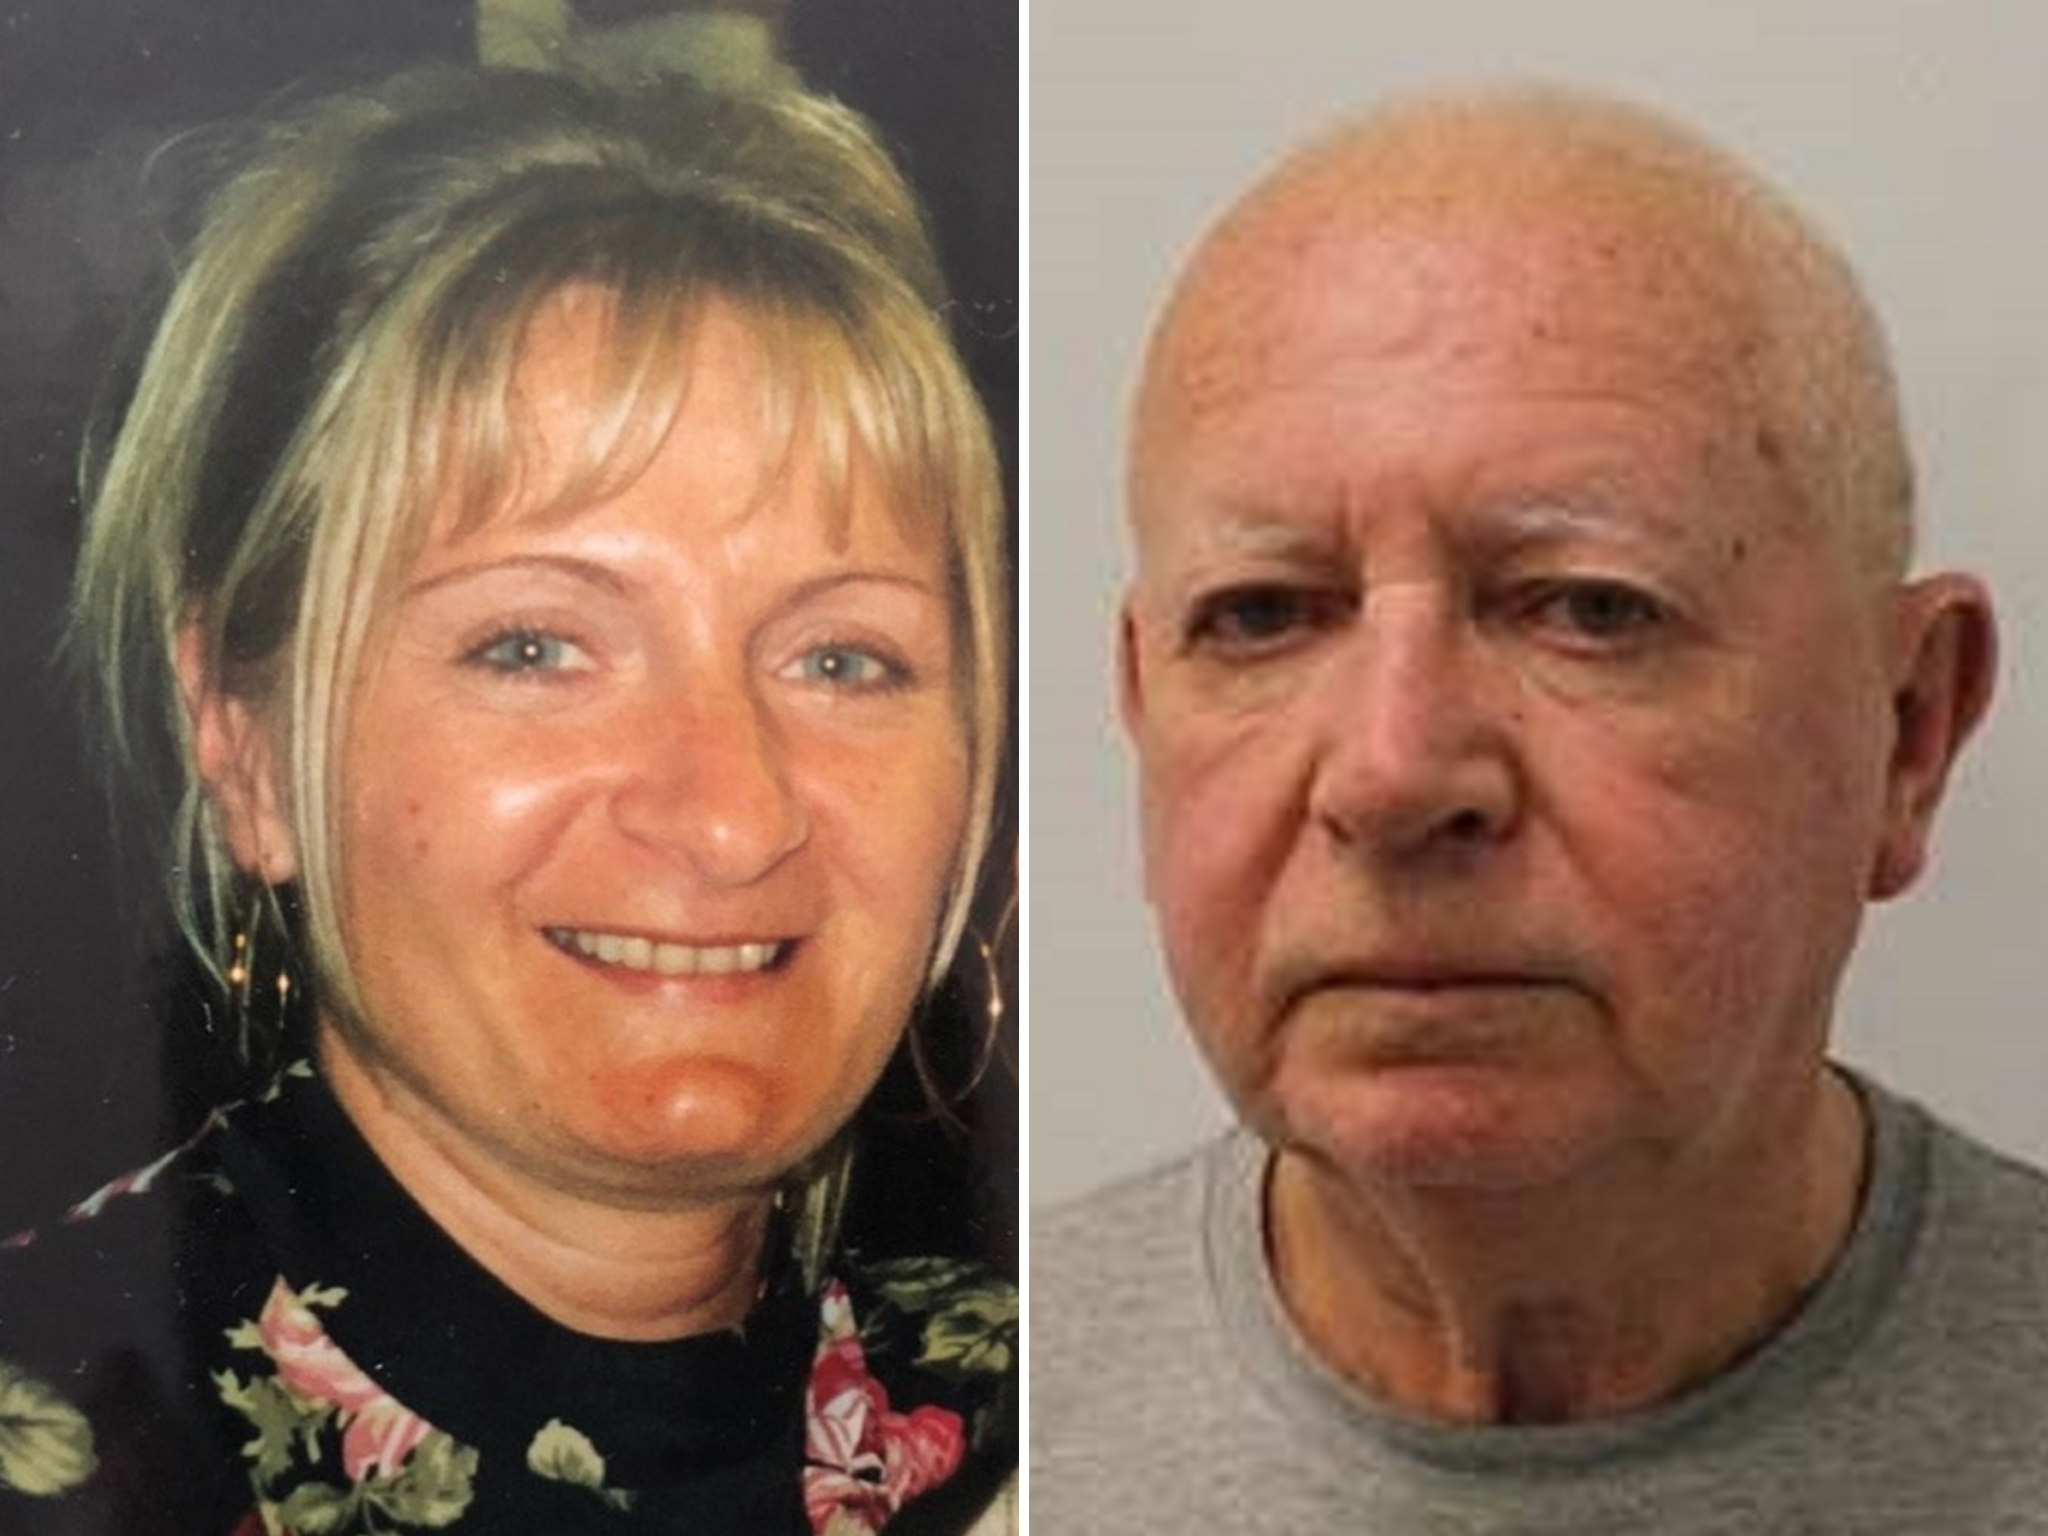 Former bus driver Keith Bettison, 73, has been jailed after choking his wife Ildiko Bettison, 48, to death on Halloween 2020